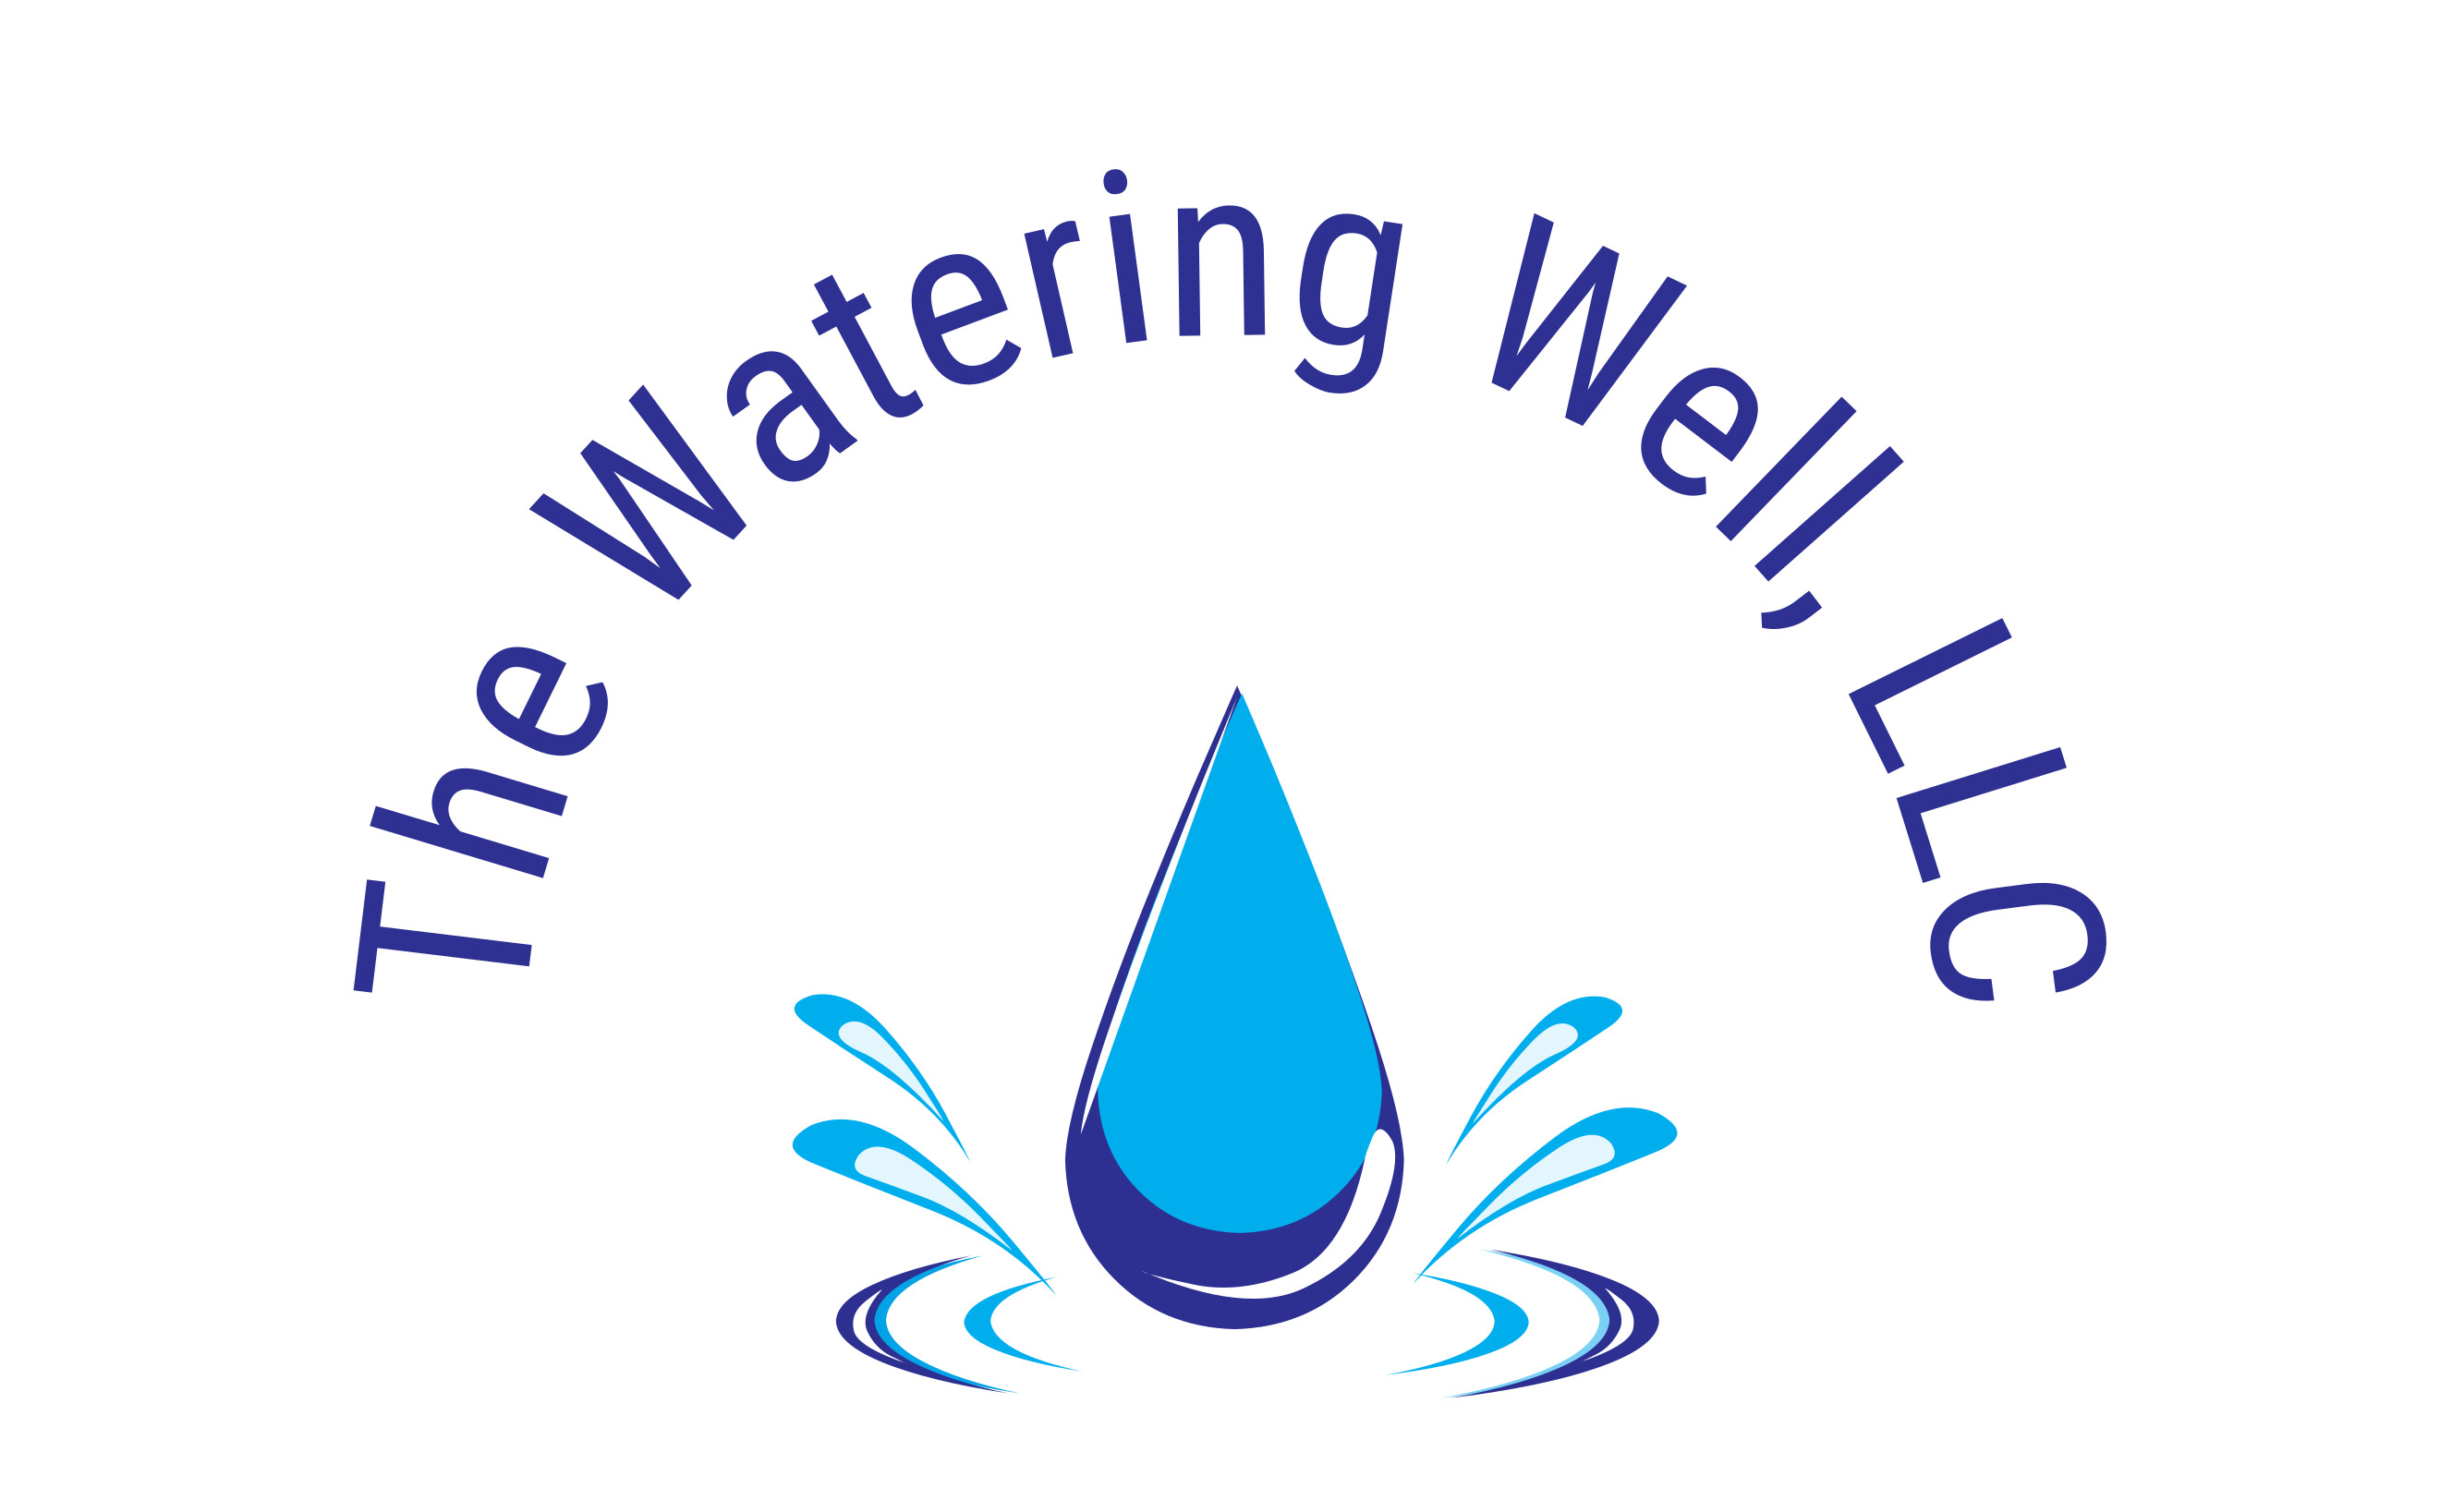 The Watering Well, LLC